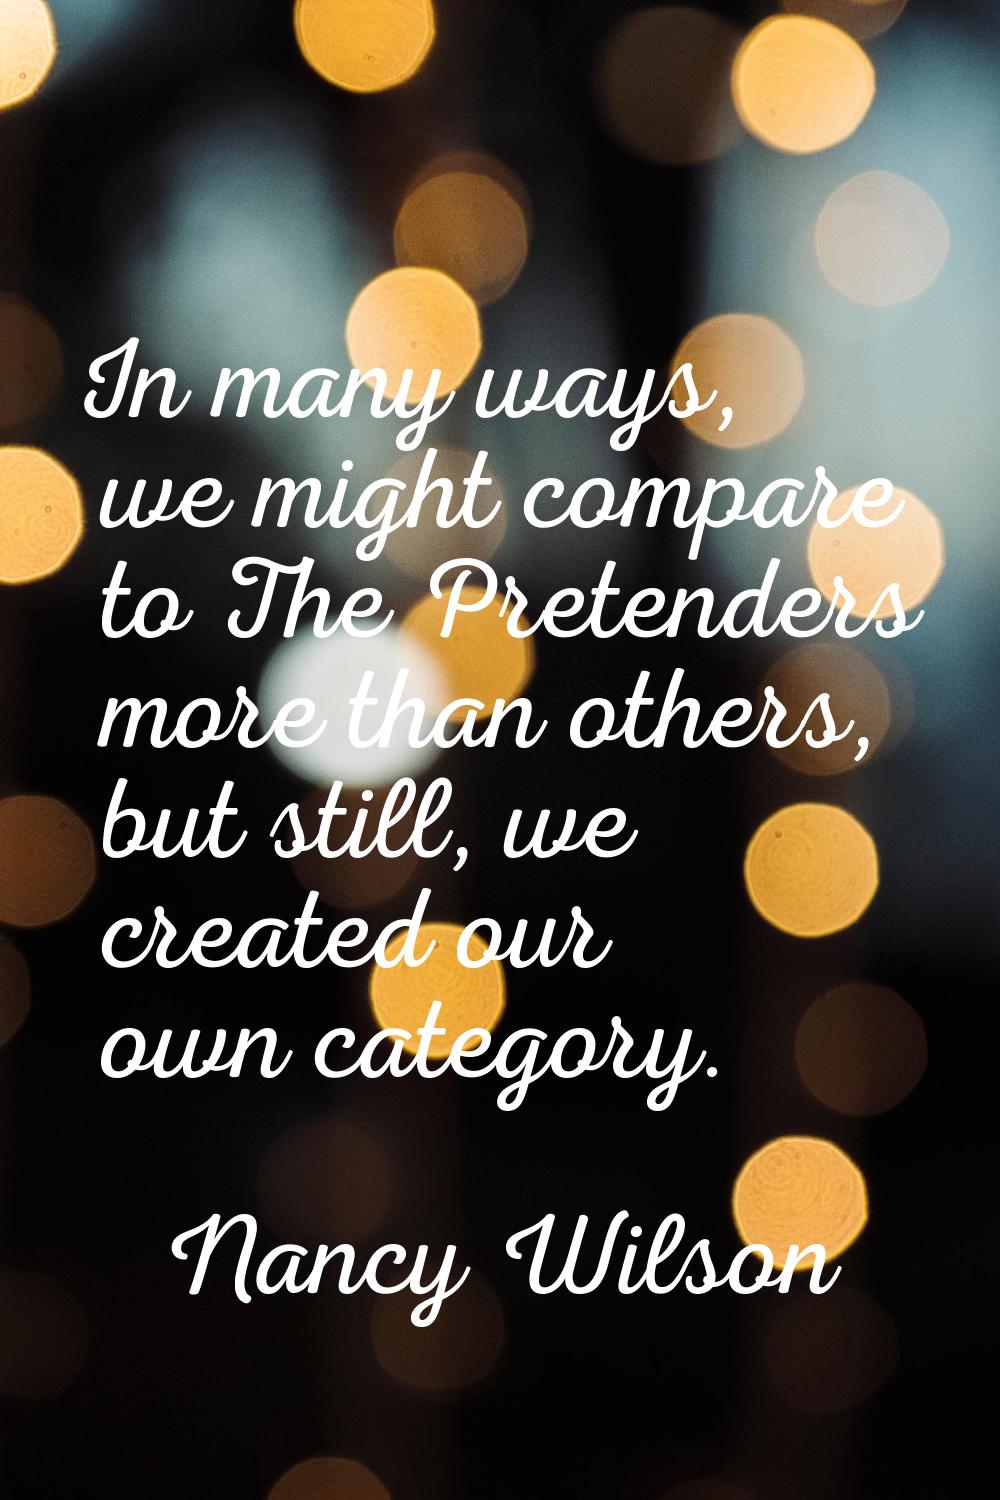 In many ways, we might compare to The Pretenders more than others, but still, we created our own ca